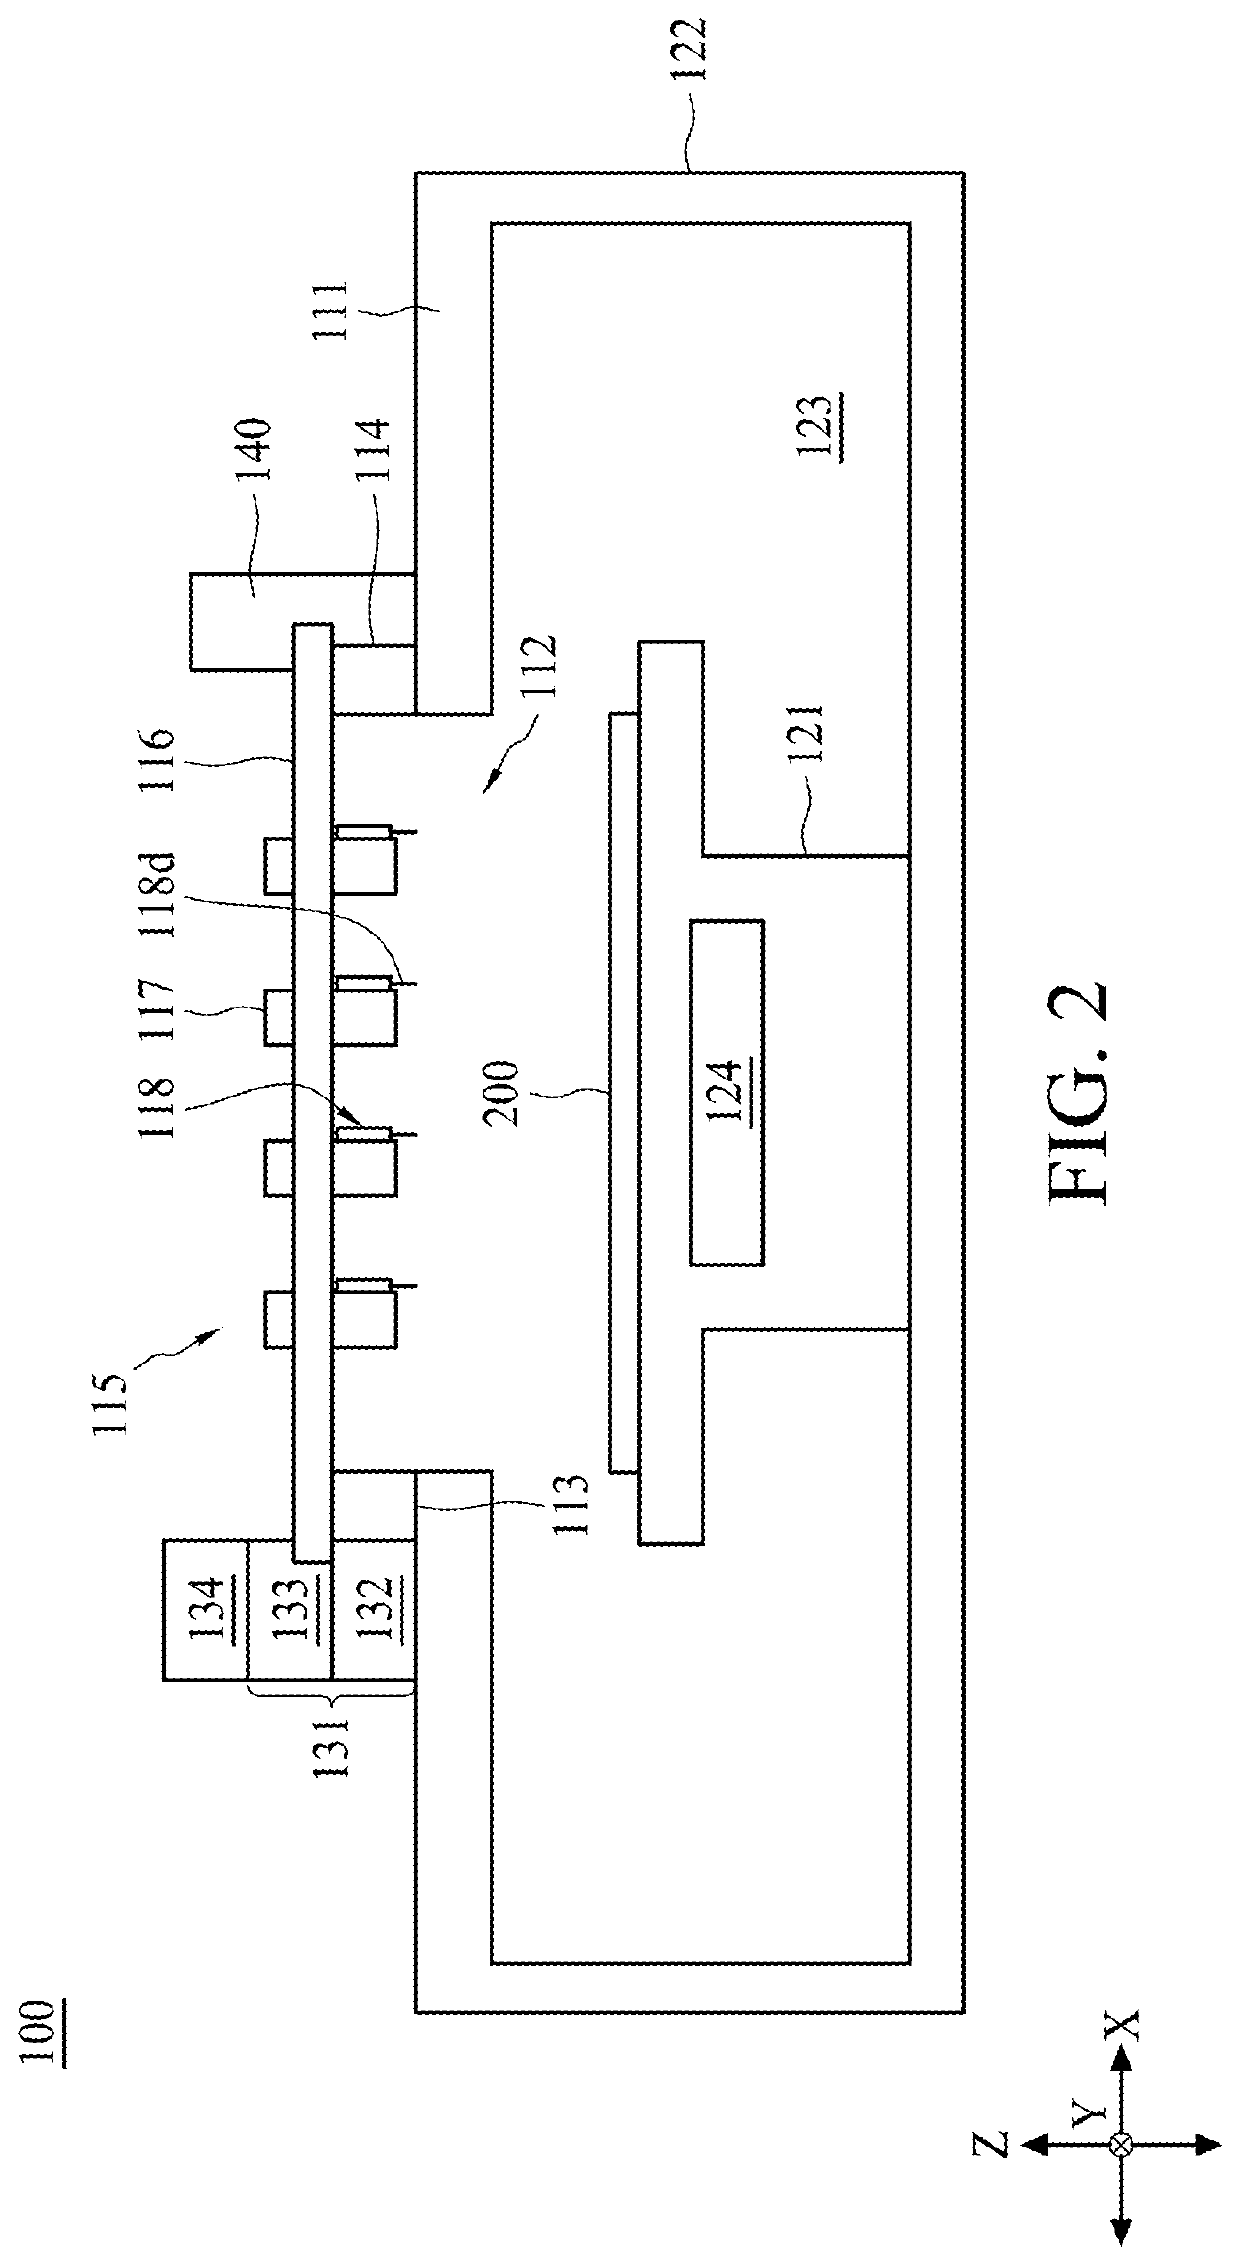 Probing apparatus and method of operating the same